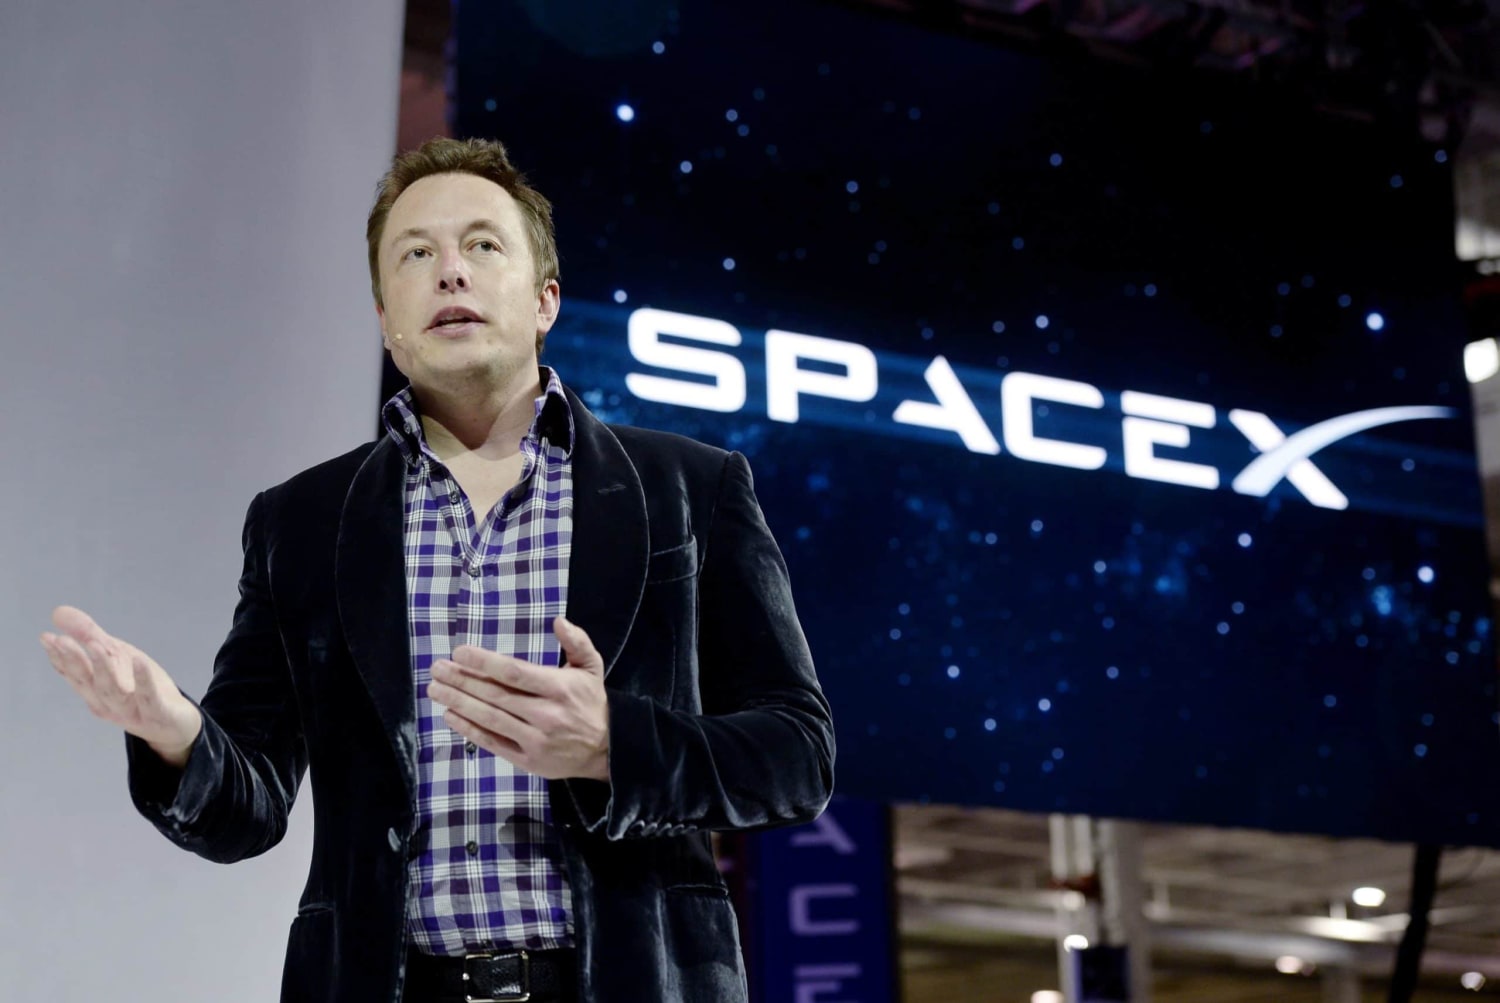 New Time! 3:00 PM Friday. SpaceX CEO Elon Musk to Speak at 2020 Mars Society Convention